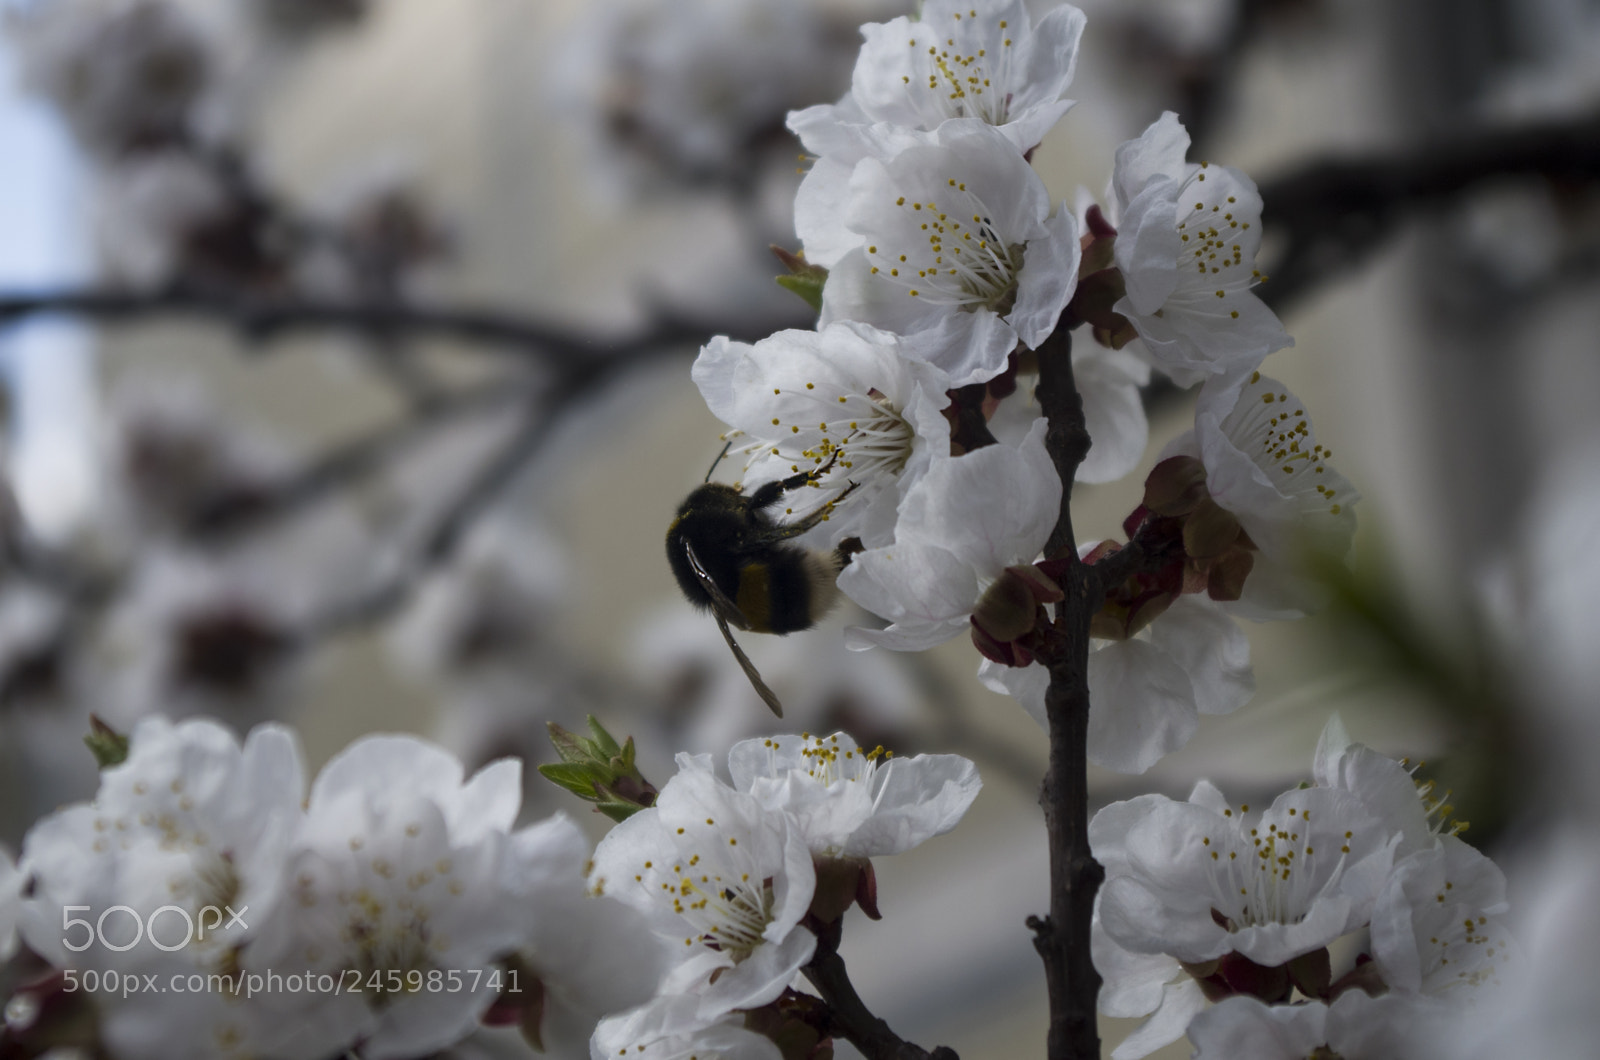 Pentax K-30 sample photo. Fluffy bumblebee on blossoming photography